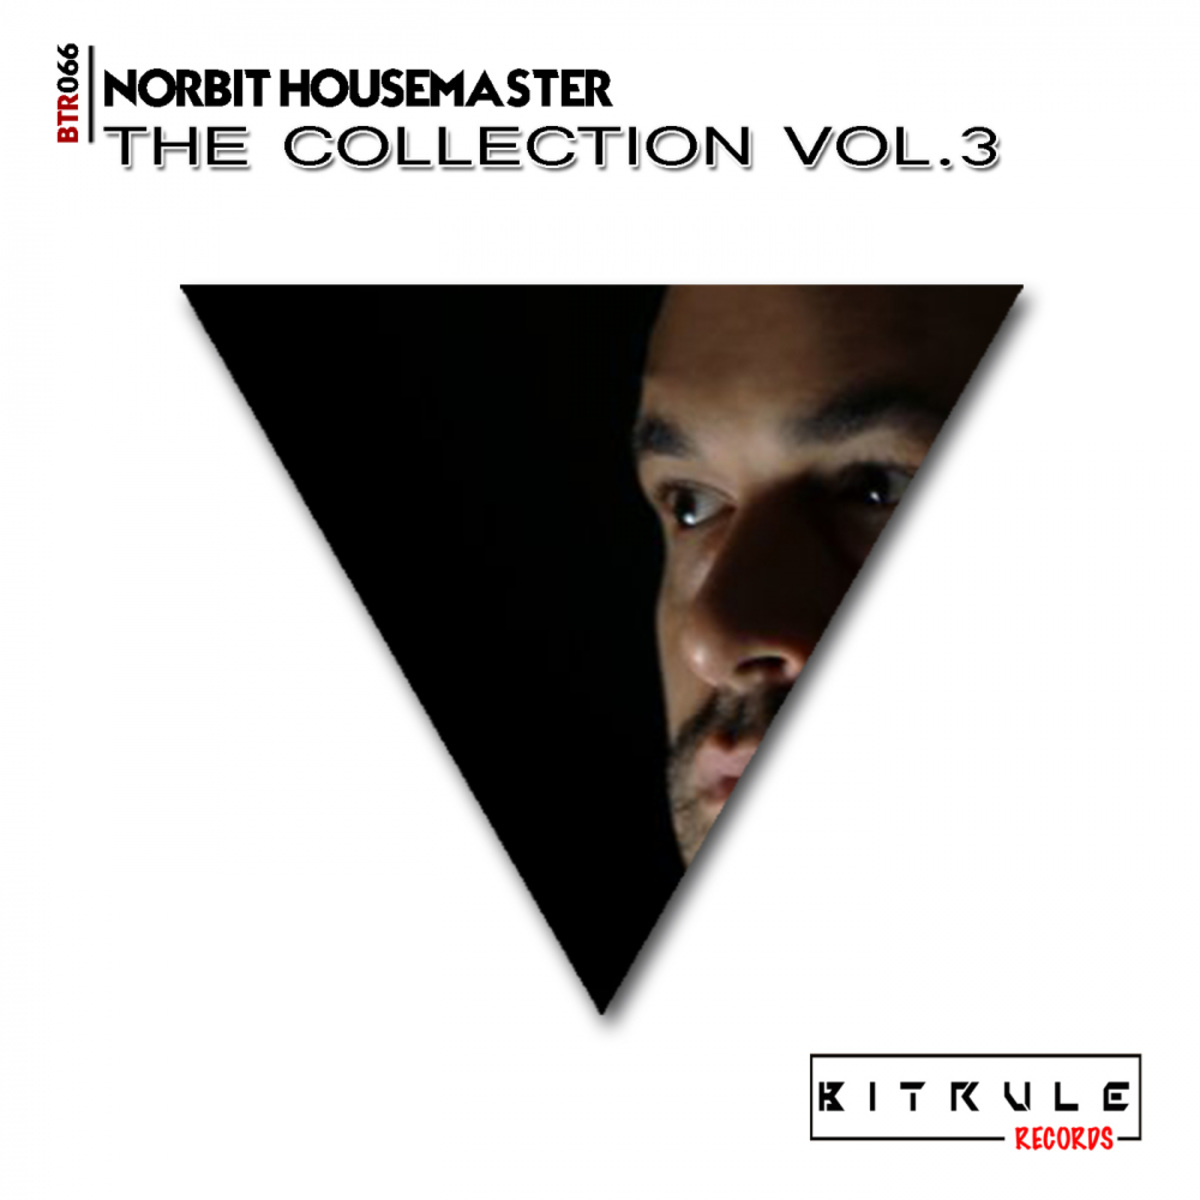 Norbit Housemaster - The Collection, Vol. 3 / Bit Rule Records